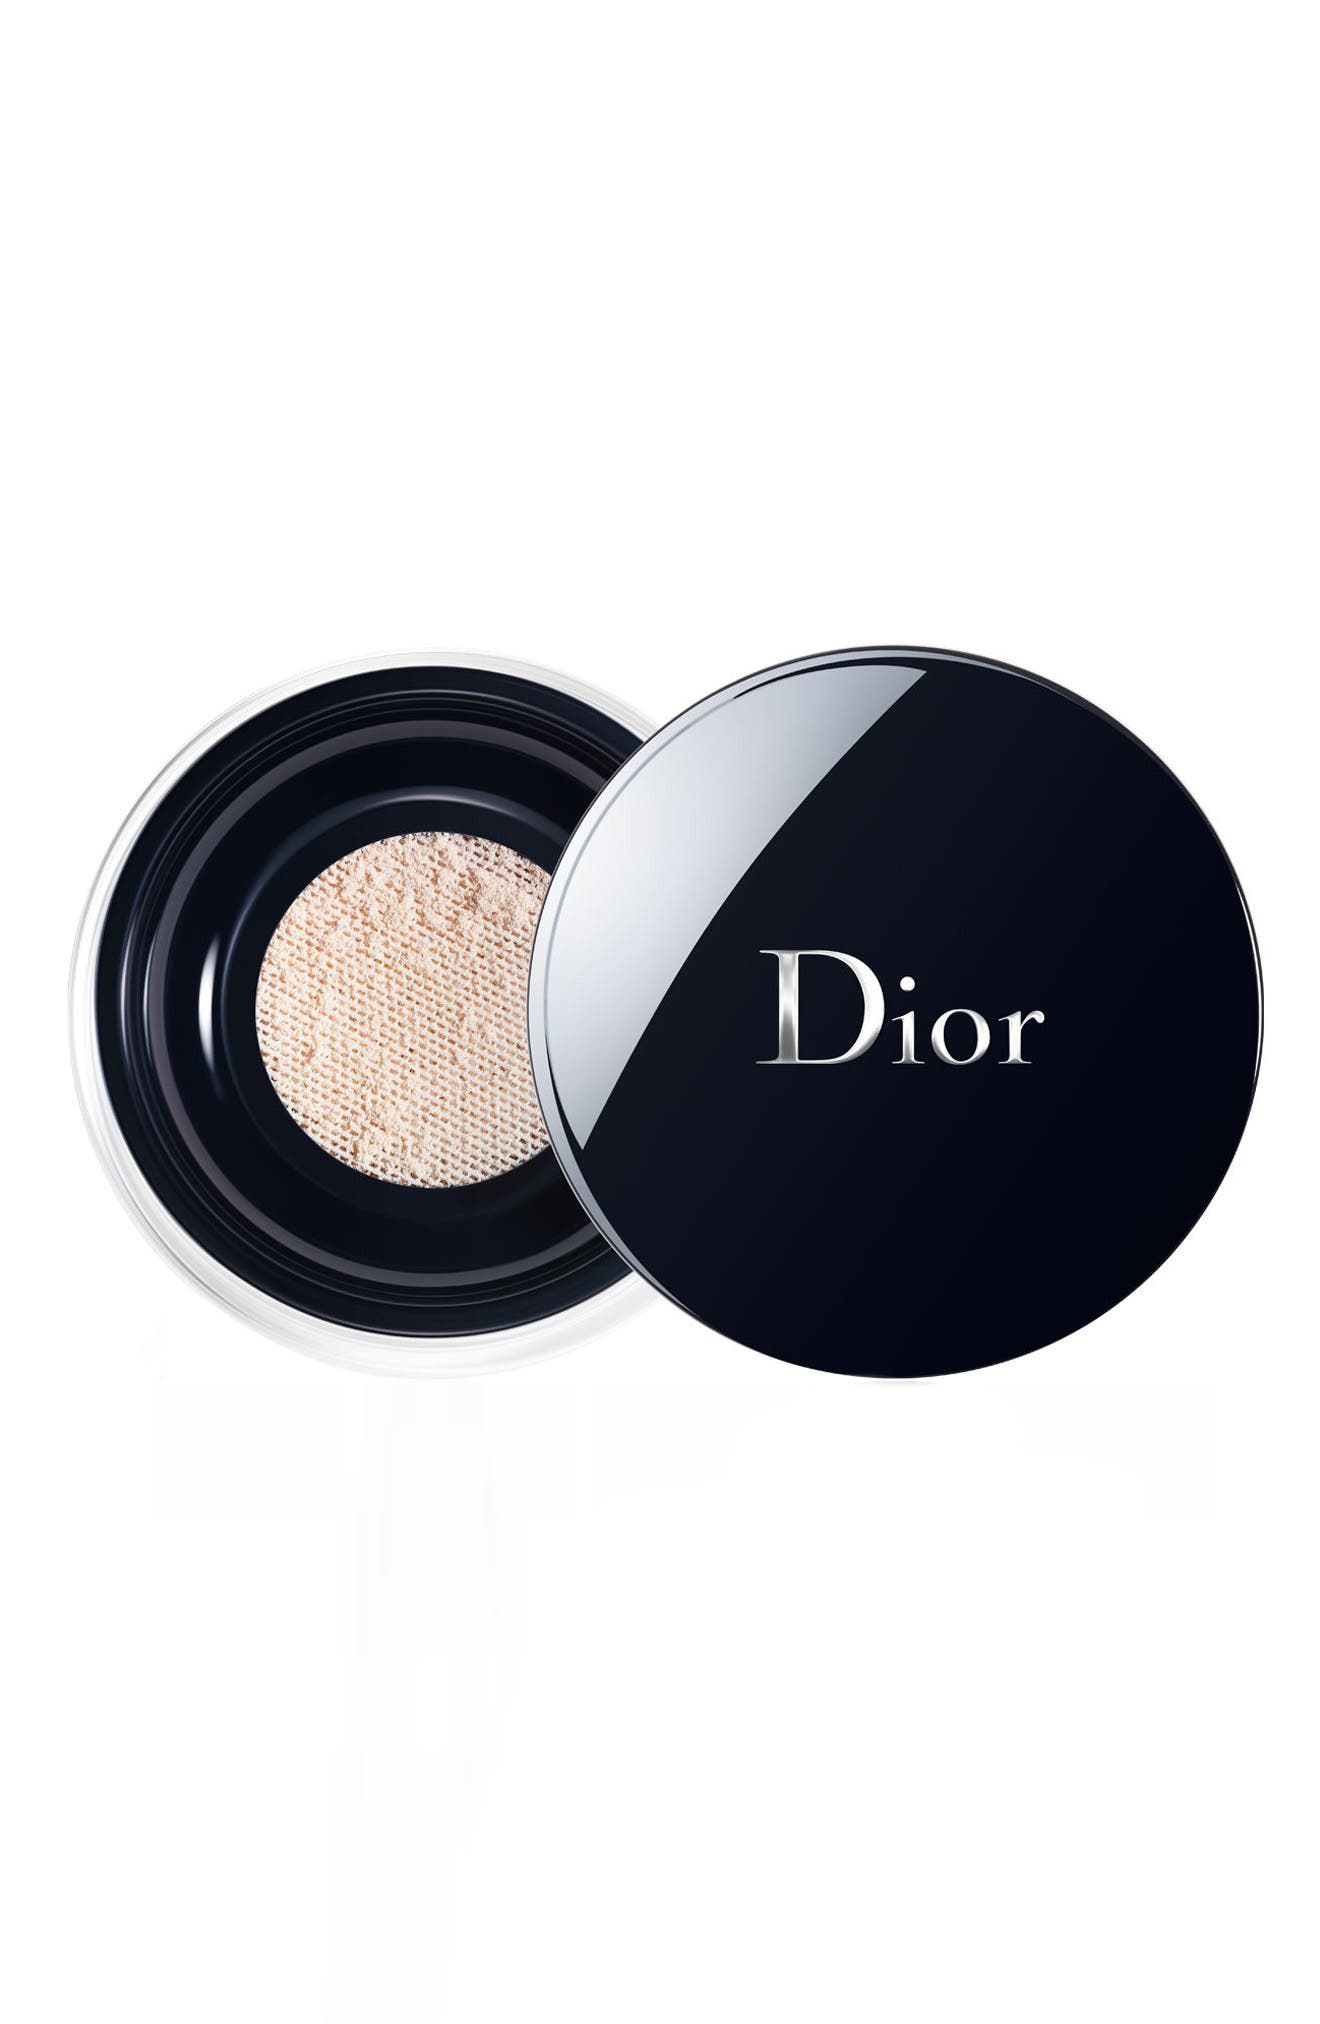 diorskin forever and ever control loose powder